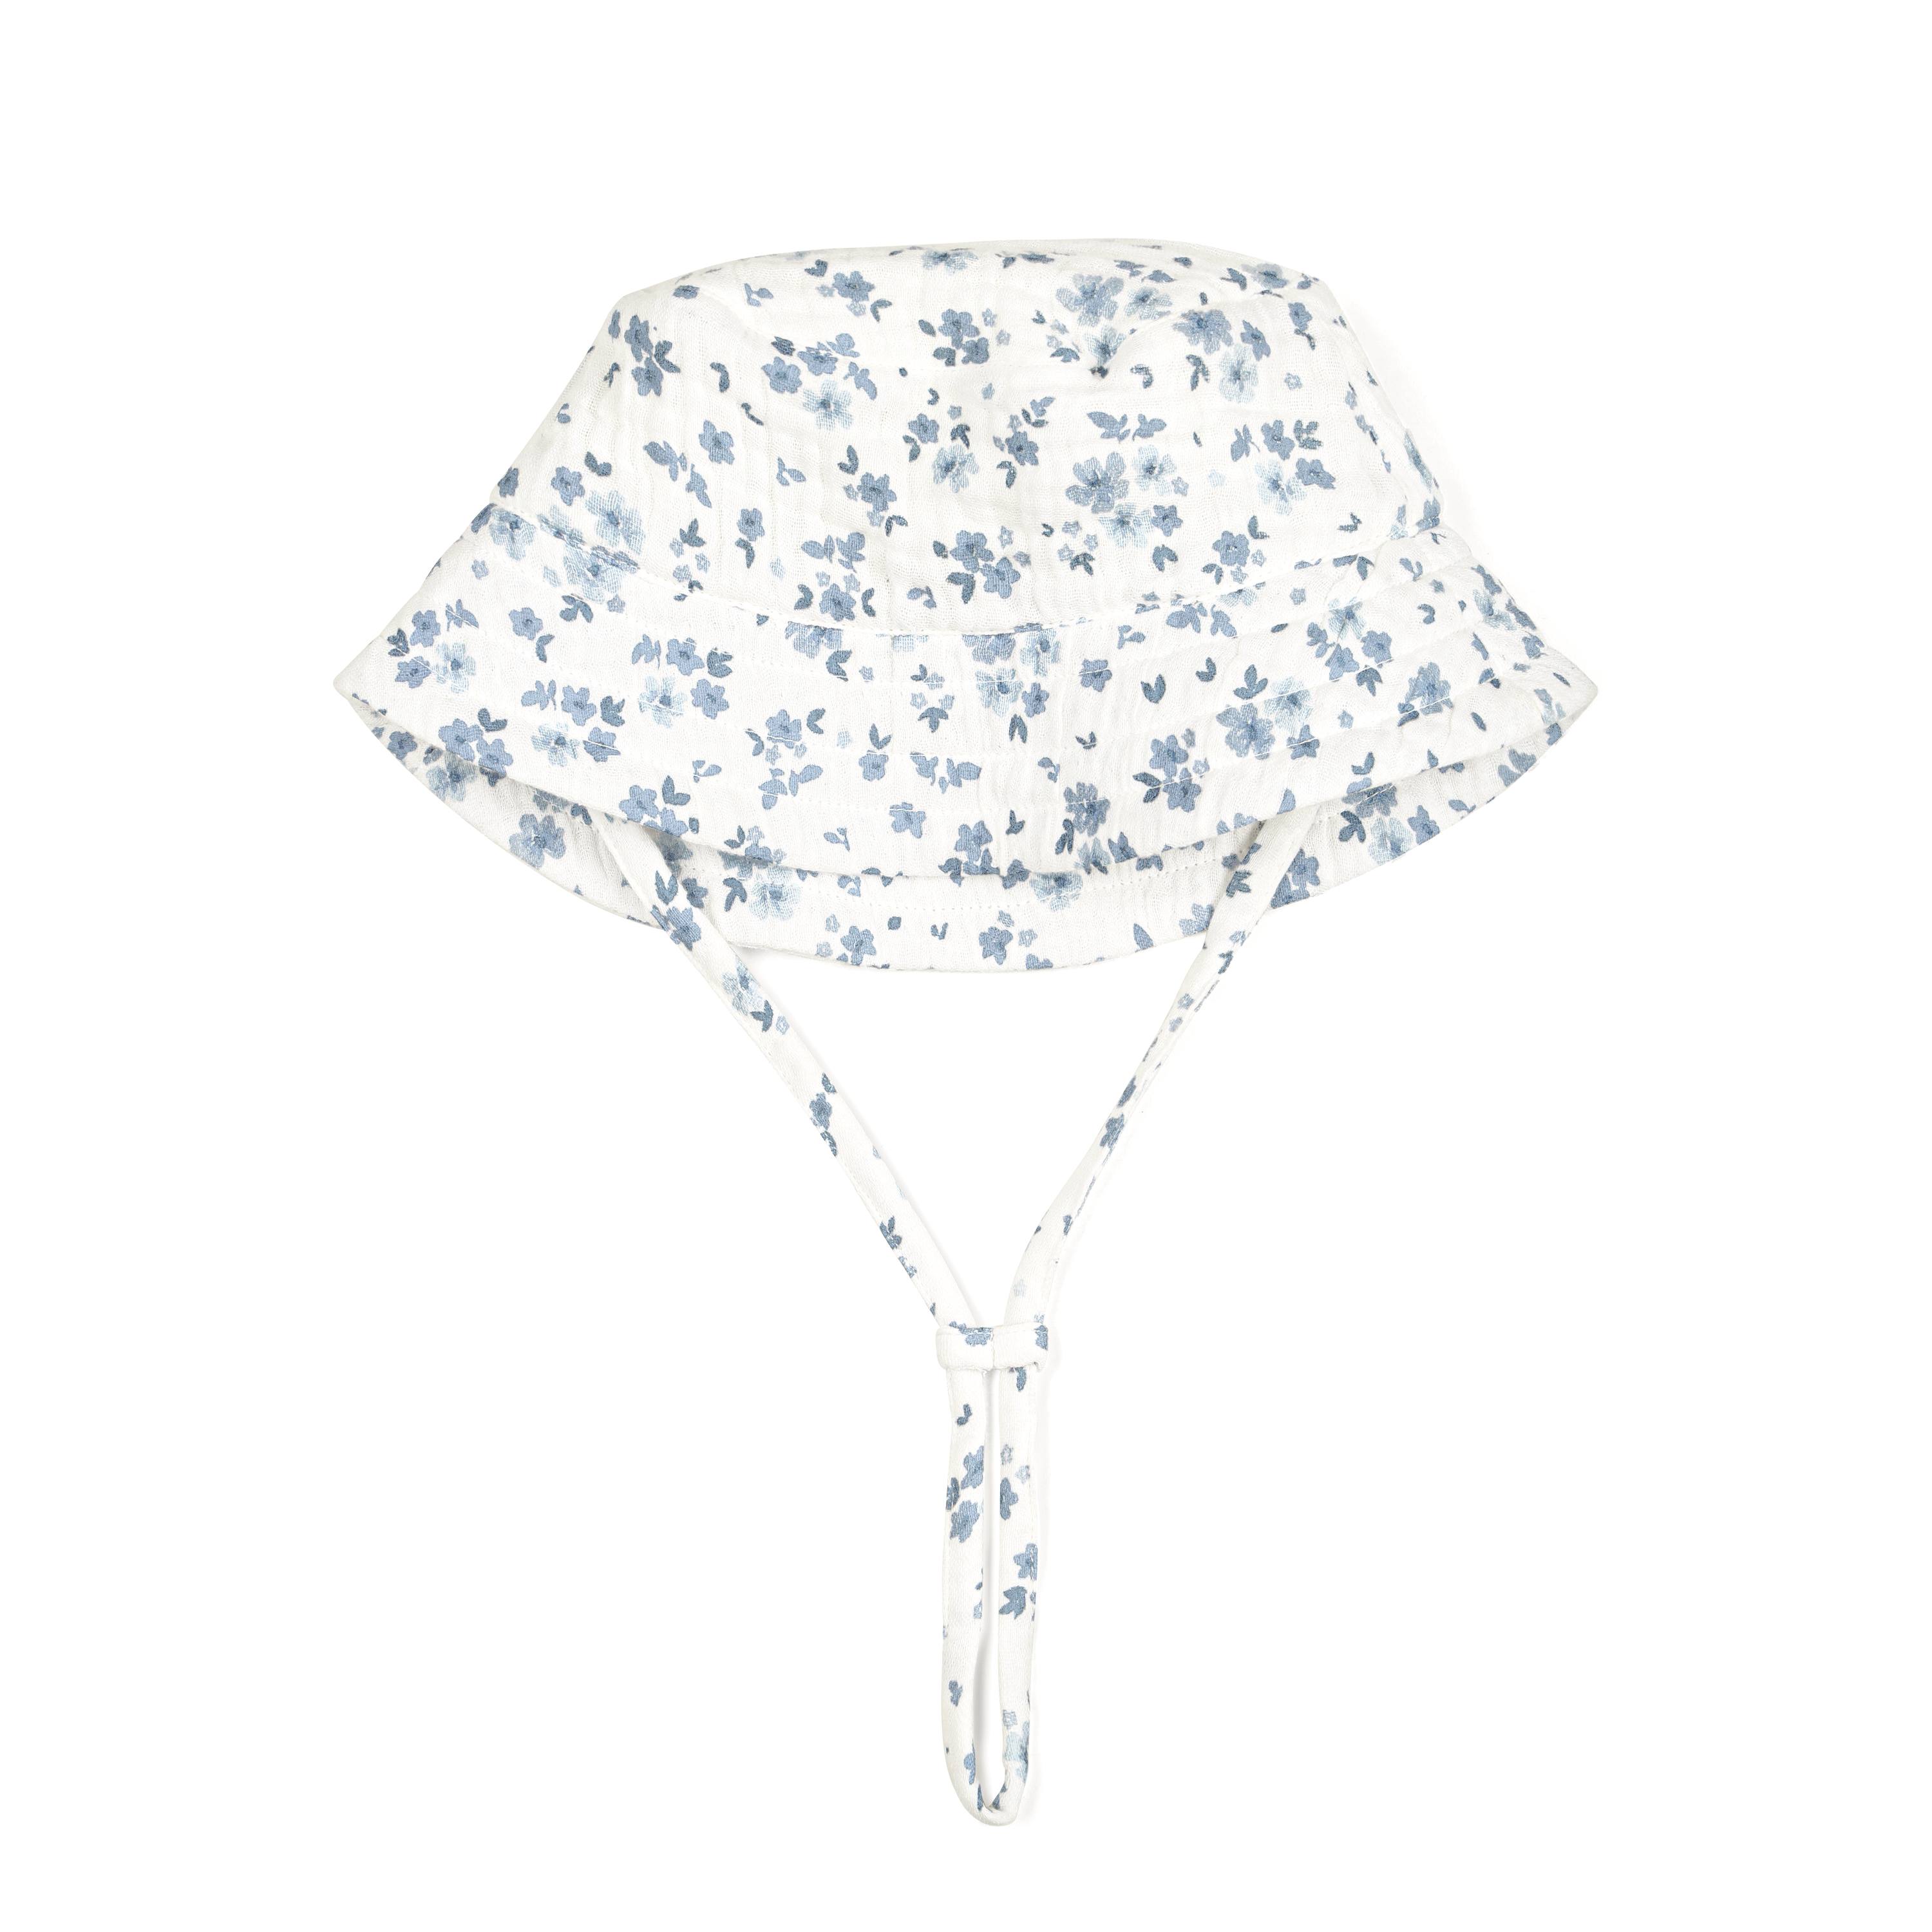 A toddler bonnet with a floral pattern in shades of blue and green, featuring a soft brim and adjustable chin strap, displayed against a white background. Product: Organic Muslin Bucket Sun Hat - Periwinkle Brand: Makemake Organics